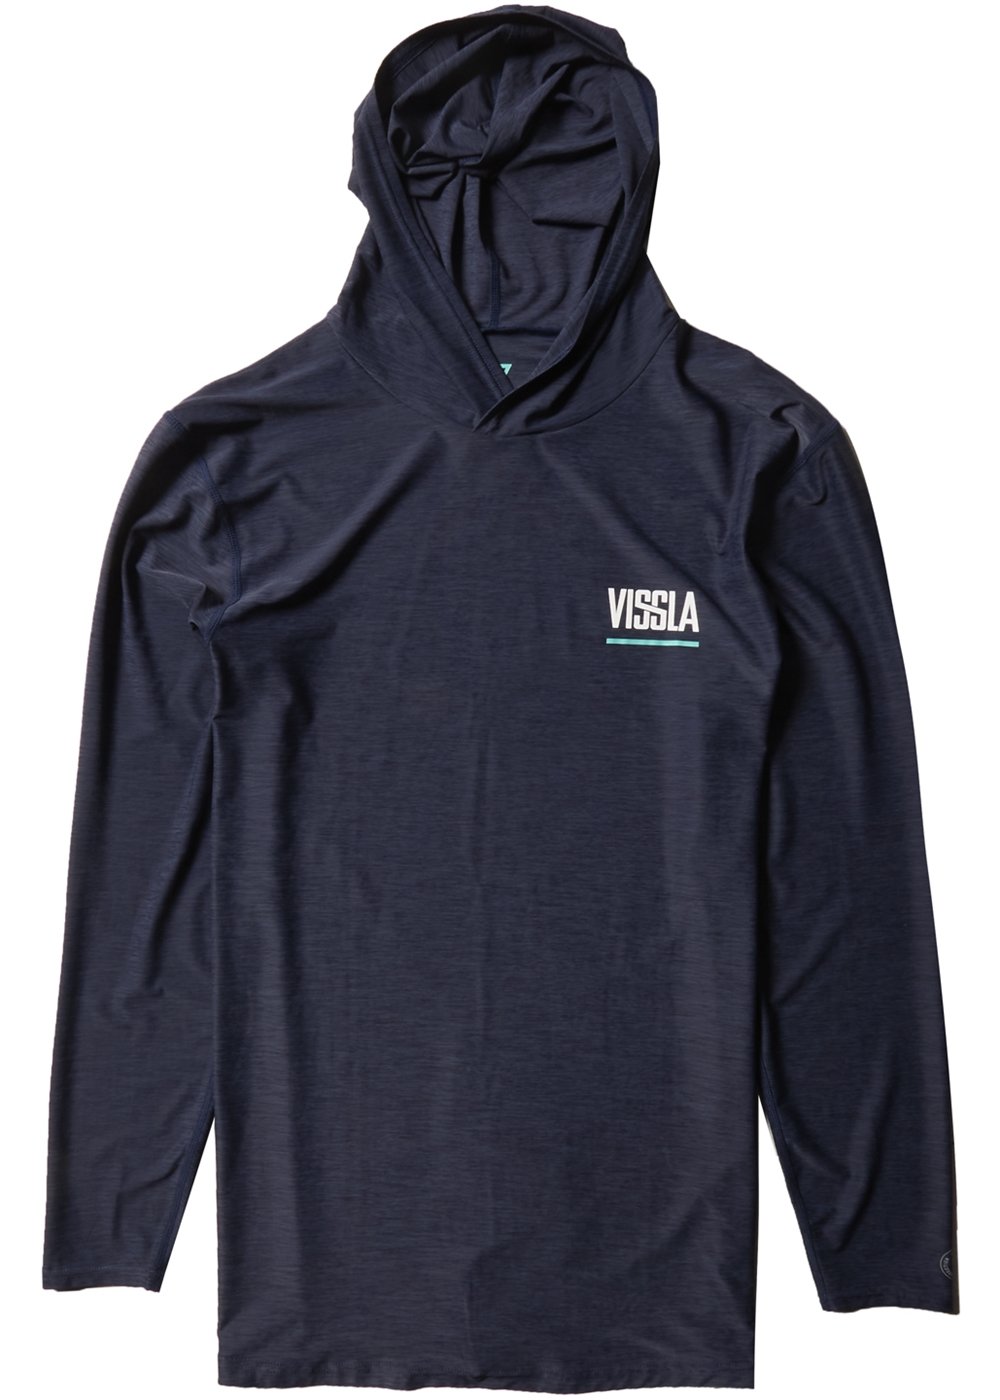 Vissla Men's naval heather Twisted Hooded Long Sleeve Rash Guard with "Vissla" printed in white on the wearer's upper left chest